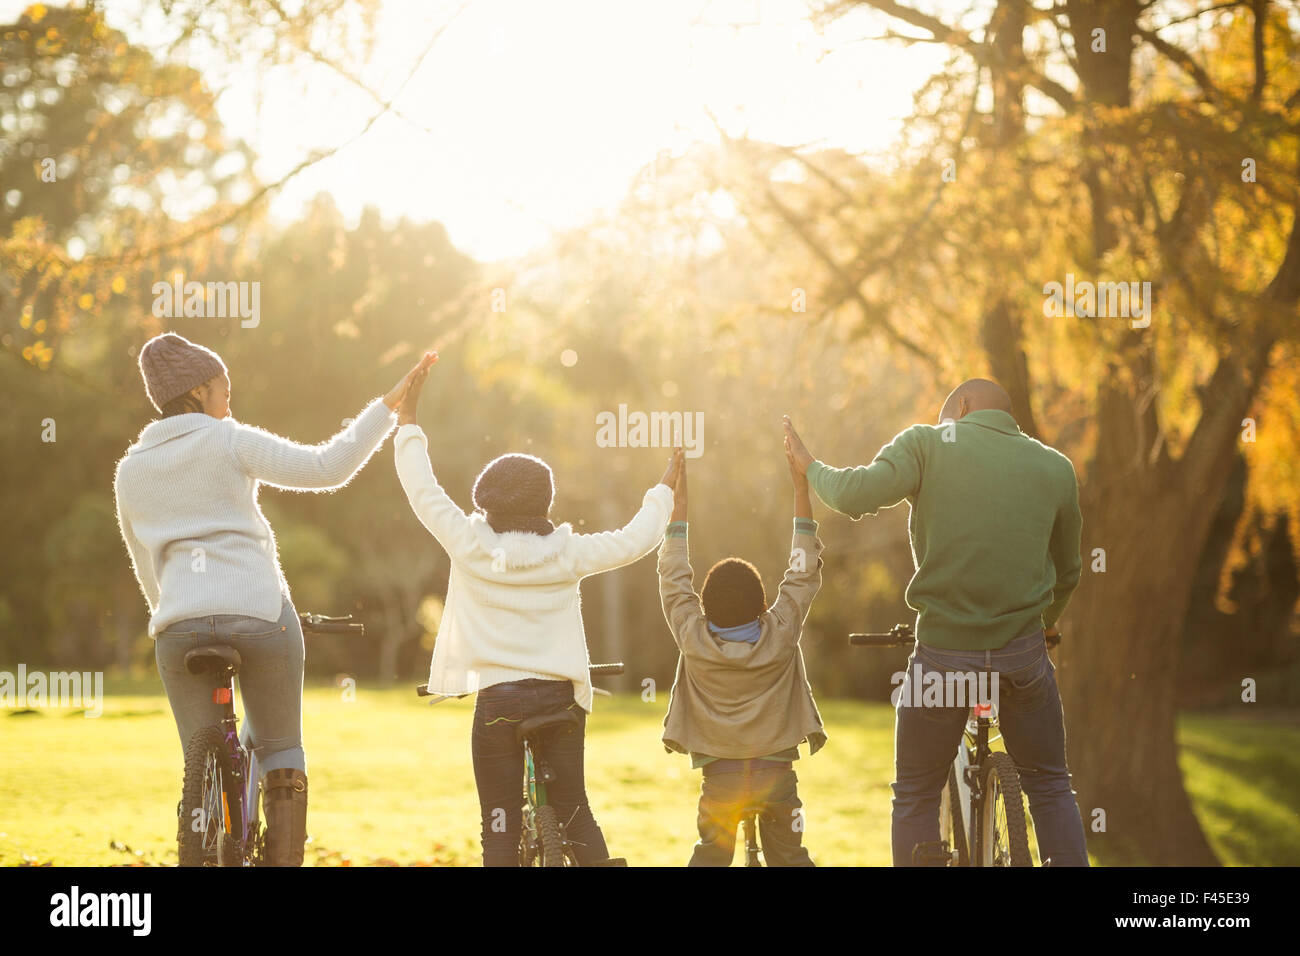 Rear view of a young family with arms raised on bike Stock Photo